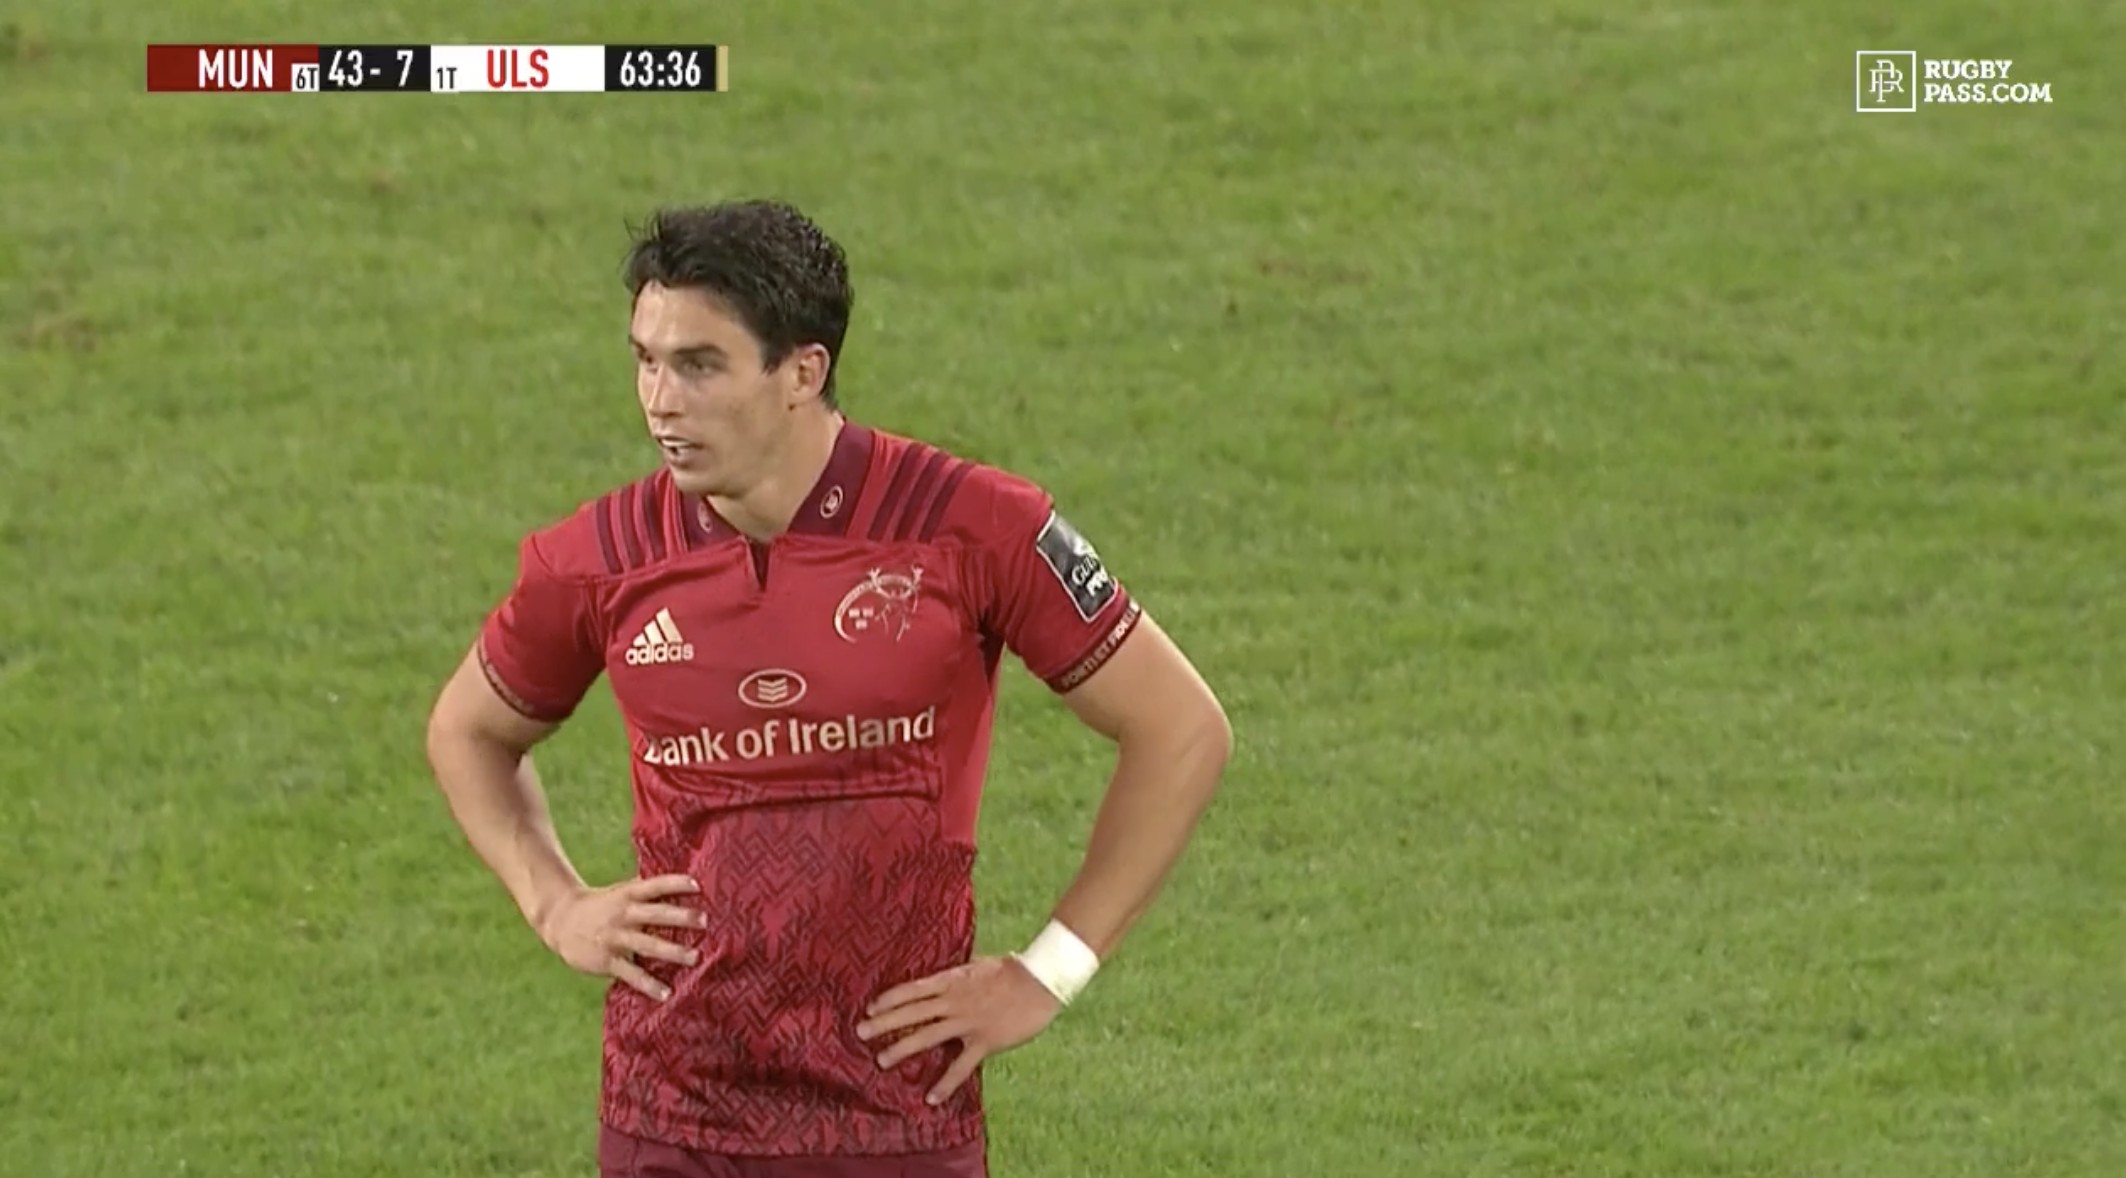 VIDEO: Joey Carbery uses his electric speed to finish off fantastic Munster team try from their own 22